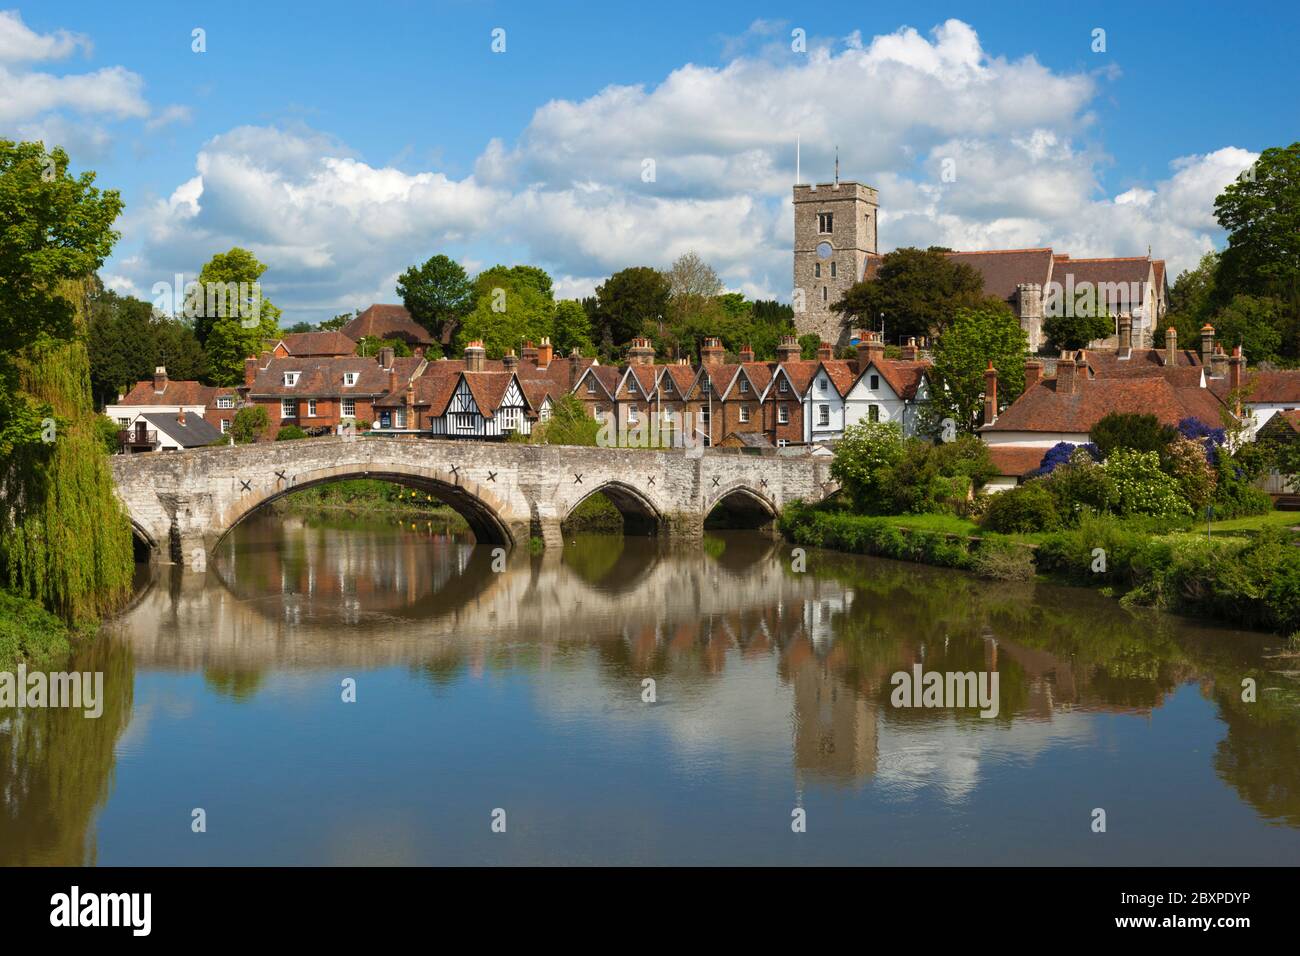 Village and medieval bridge over the River Medway, Aylesford, Kent, England, United Kingdom, Europe Stock Photo